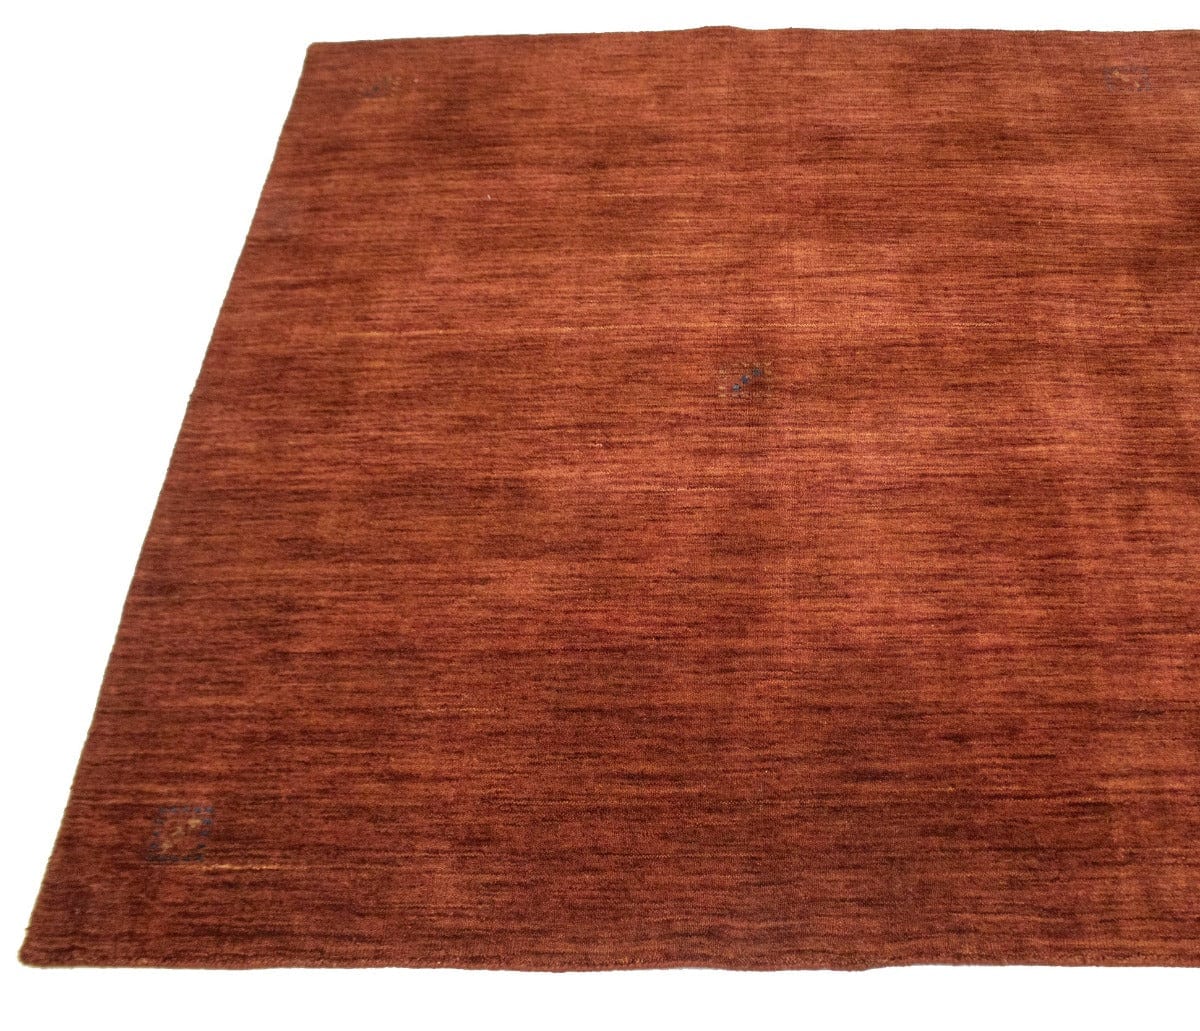 Solid Rusty Red 5X5 Oriental Modern Square Rug